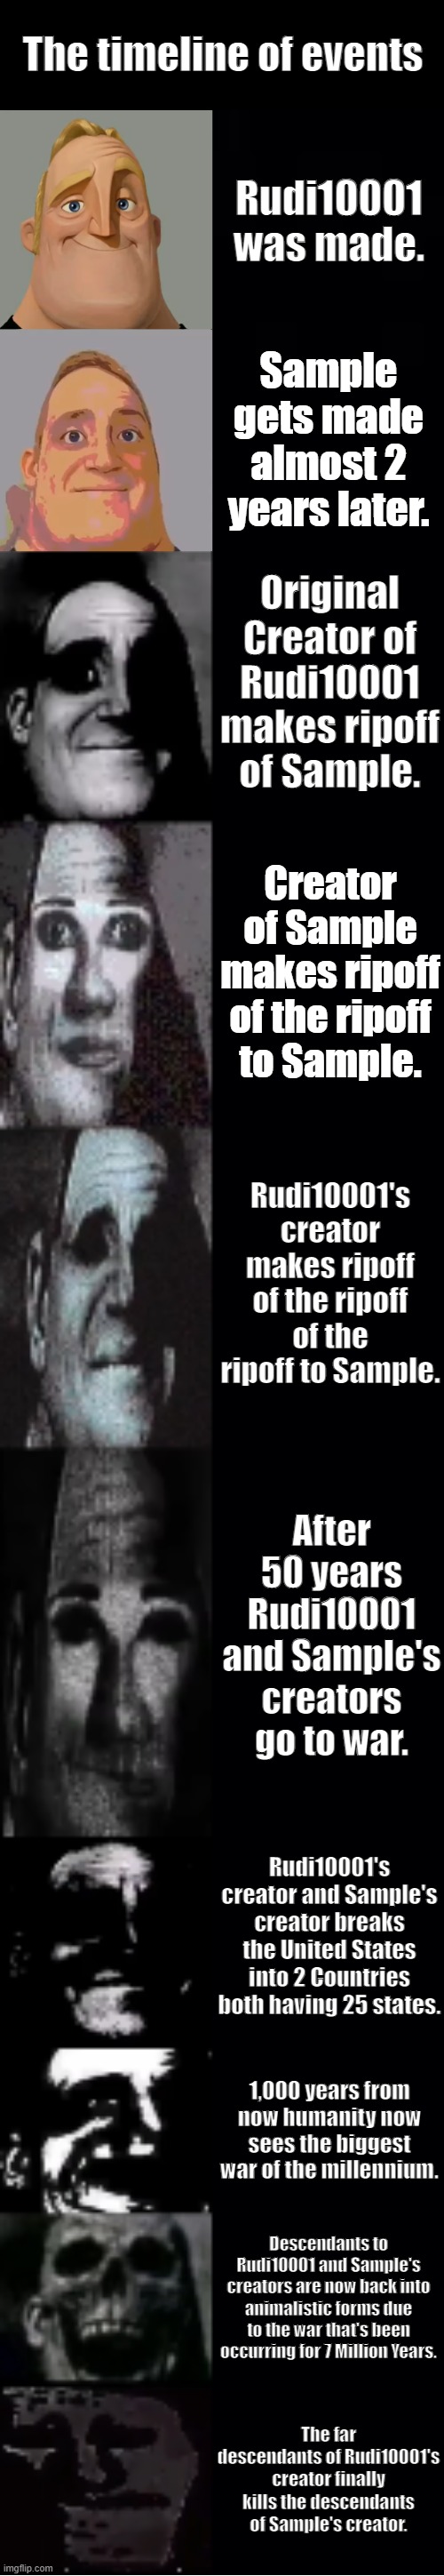 Rudi10001 vs Sample | The timeline of events; Rudi10001 was made. Sample gets made almost 2 years later. Original Creator of Rudi10001 makes ripoff of Sample. Creator of Sample makes ripoff of the ripoff to Sample. Rudi10001's creator makes ripoff of the ripoff of the ripoff to Sample. After 50 years Rudi10001 and Sample's creators go to war. Rudi10001's creator and Sample's creator breaks the United States into 2 Countries both having 25 states. 1,000 years from now humanity now sees the biggest war of the millennium. Descendants to Rudi10001 and Sample's creators are now back into animalistic forms due to the war that's been occurring for 7 Million Years. The far descendants of Rudi10001's creator finally kills the descendants of Sample's creator. | image tagged in mr incredible becoming uncanny,deviantart,ripoff,prediction,the future | made w/ Imgflip meme maker